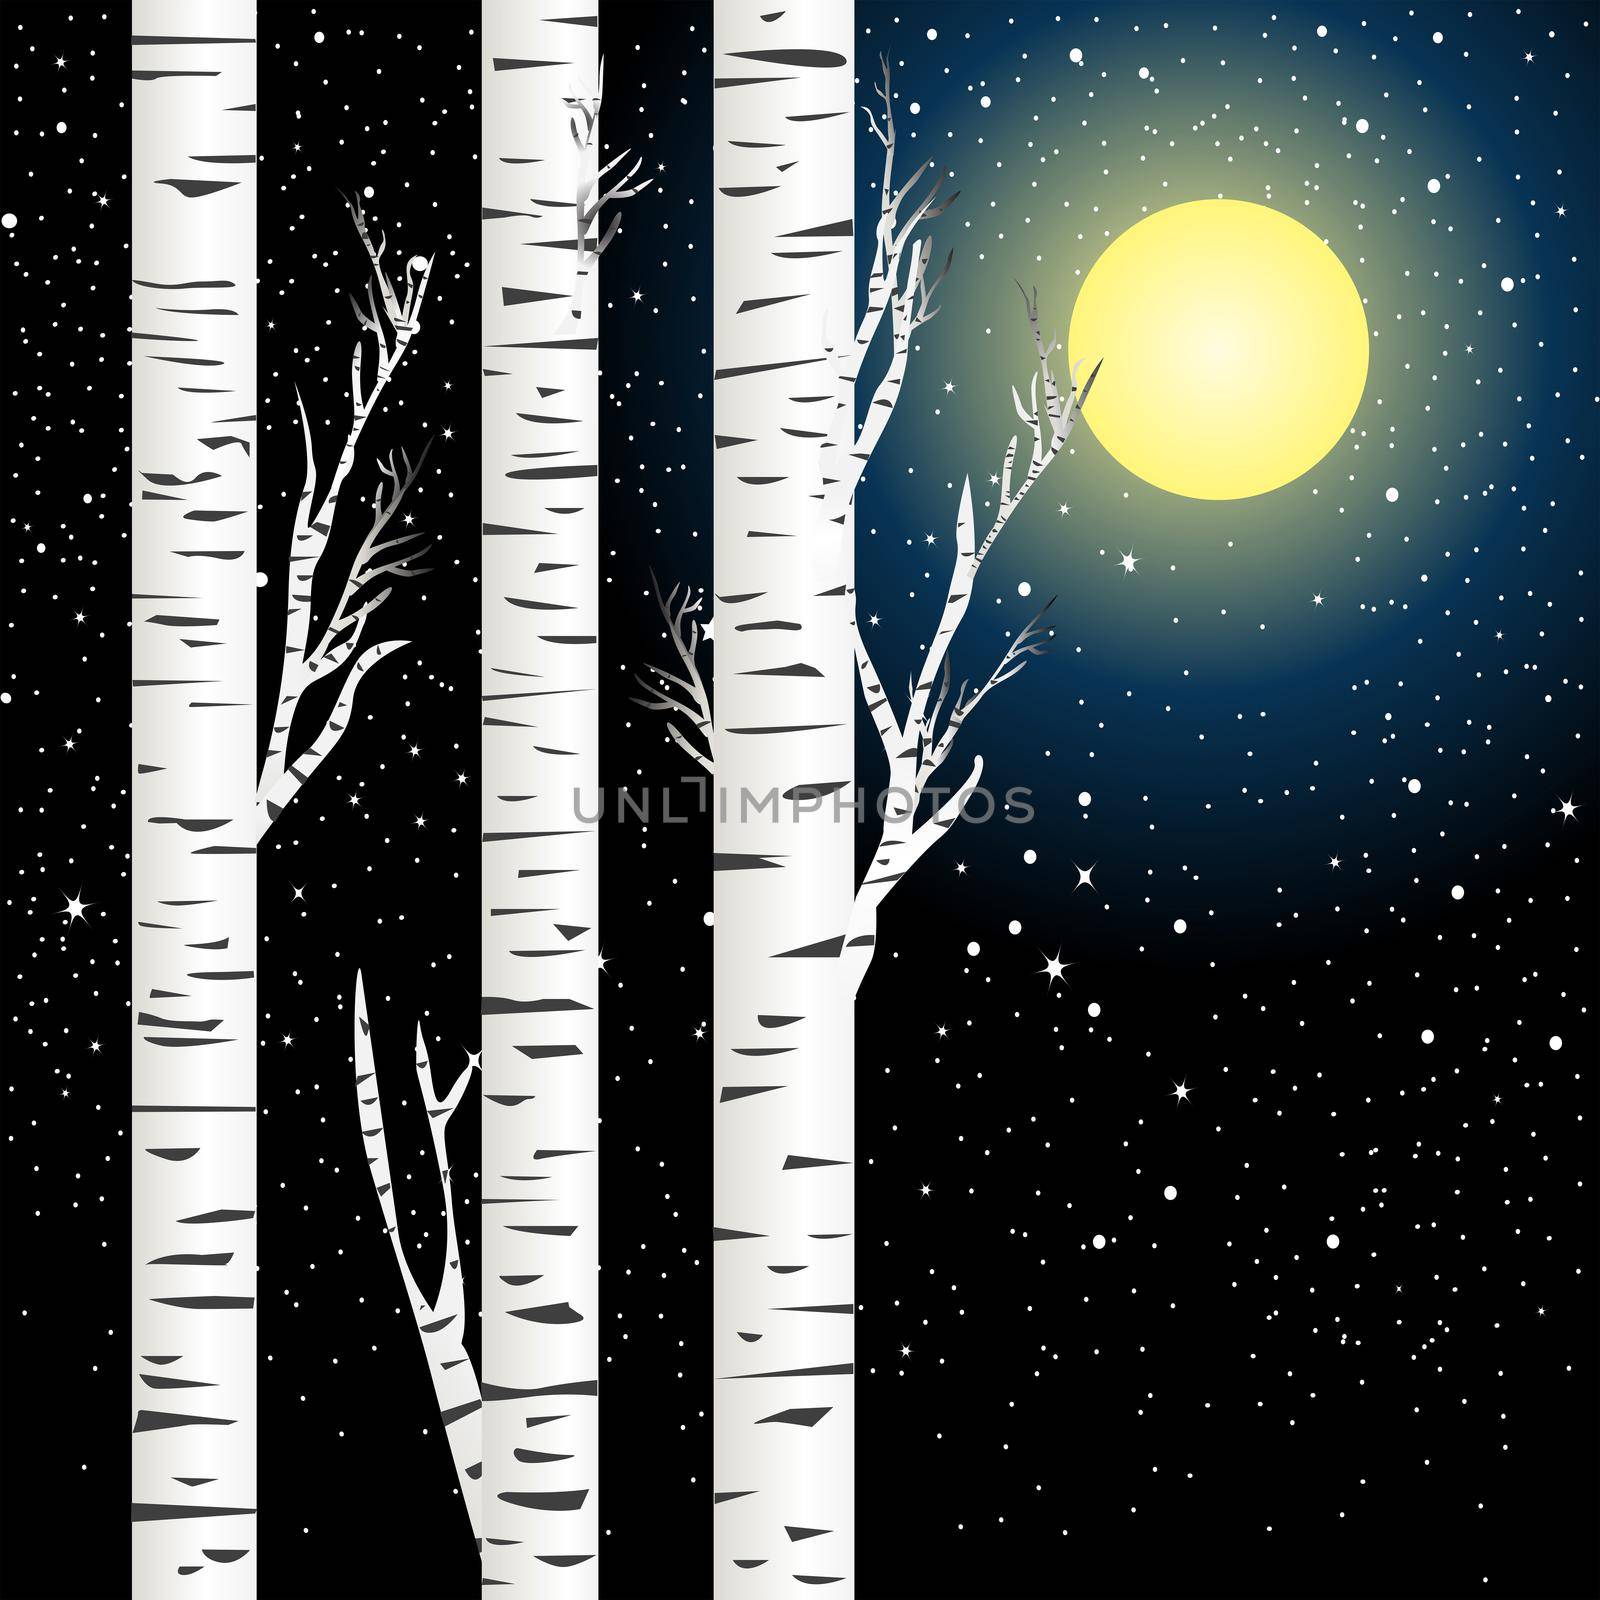 Birch trees against night sky with full moon and stars by hibrida13